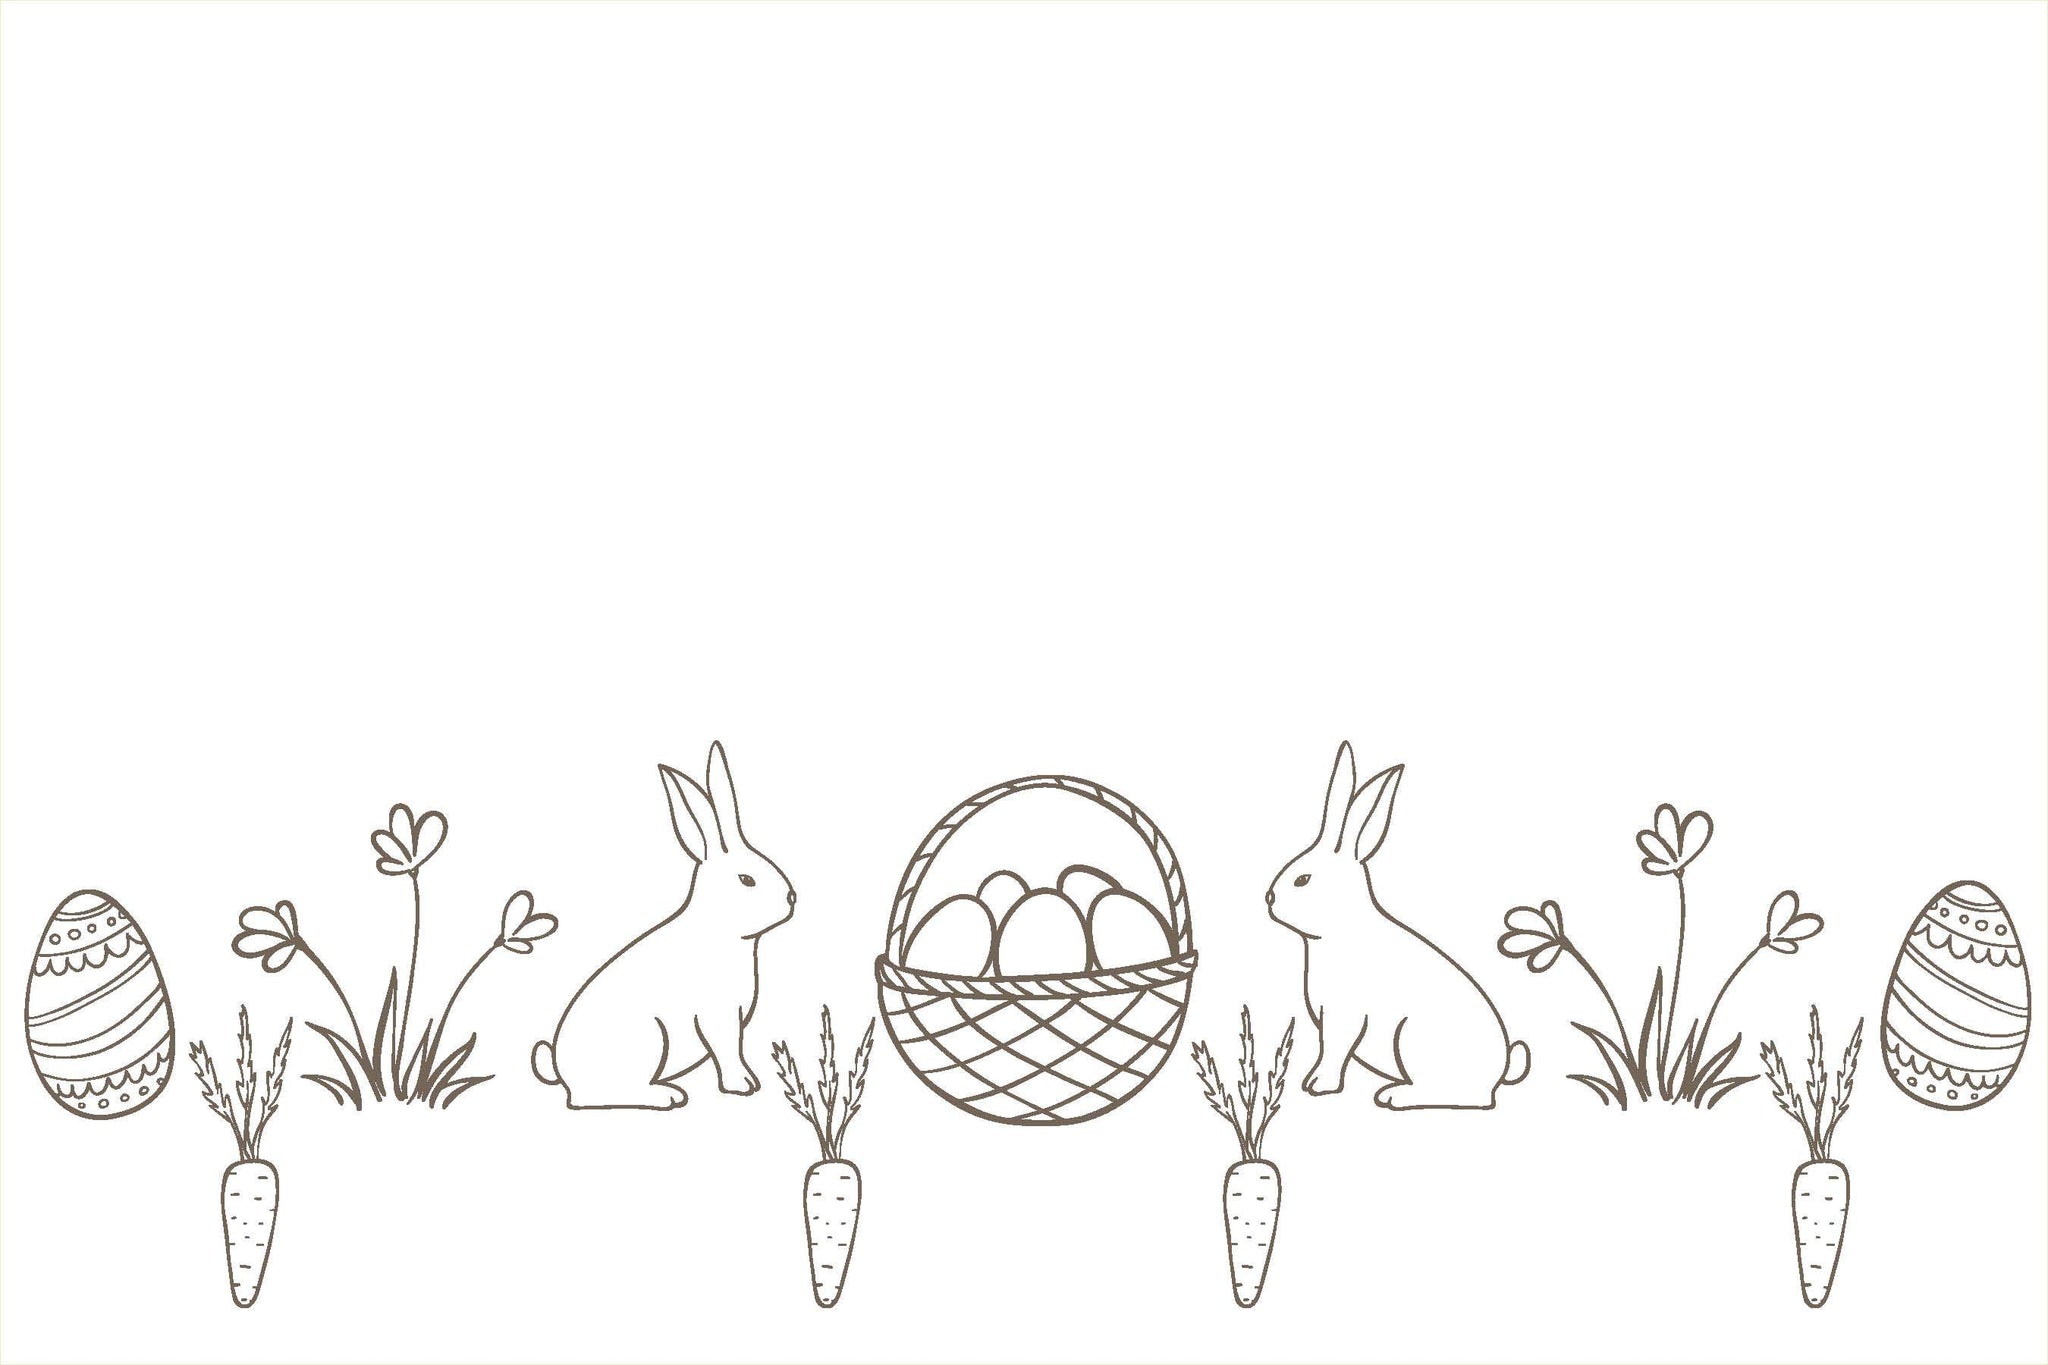 Bunnies & Easter Basket perfect for Coloring Placemats